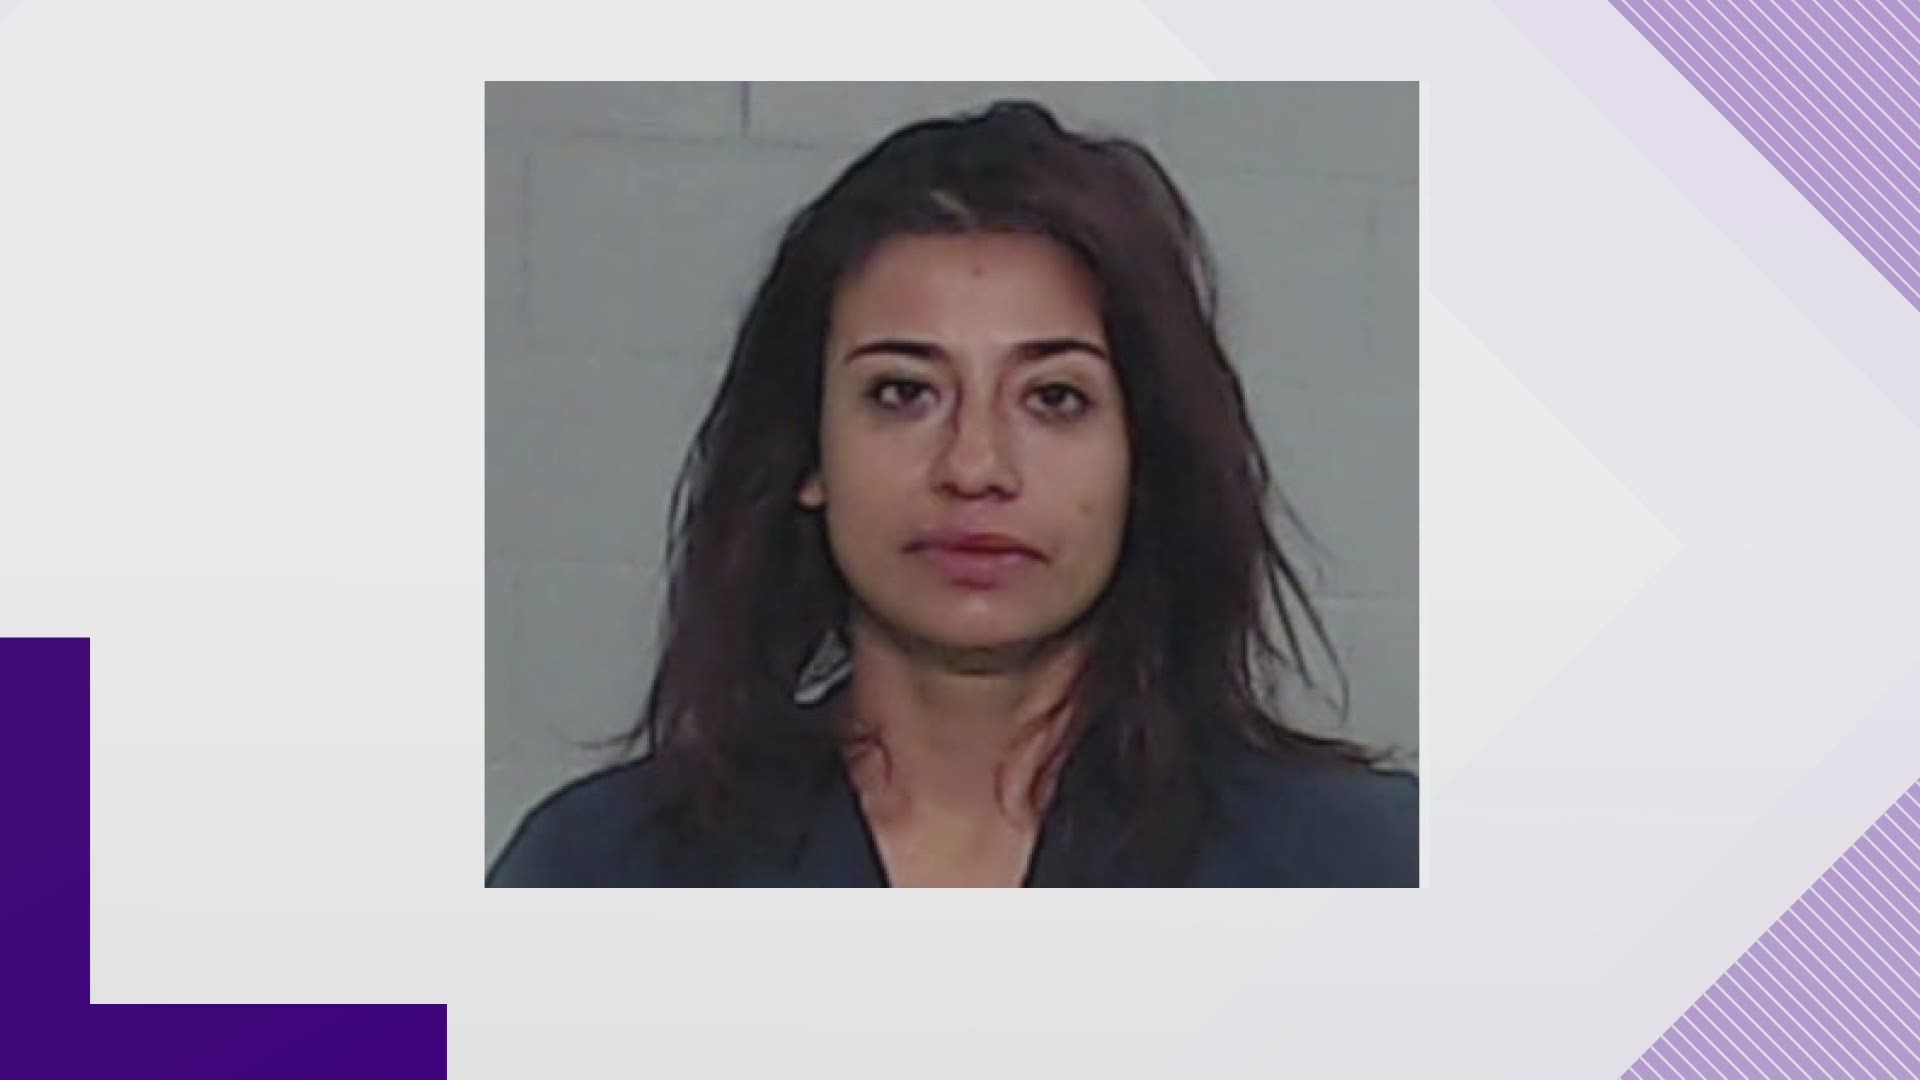 Christina Lira Alaniz is wanted for illegal dumping and going off bond on charges of stealing a car.